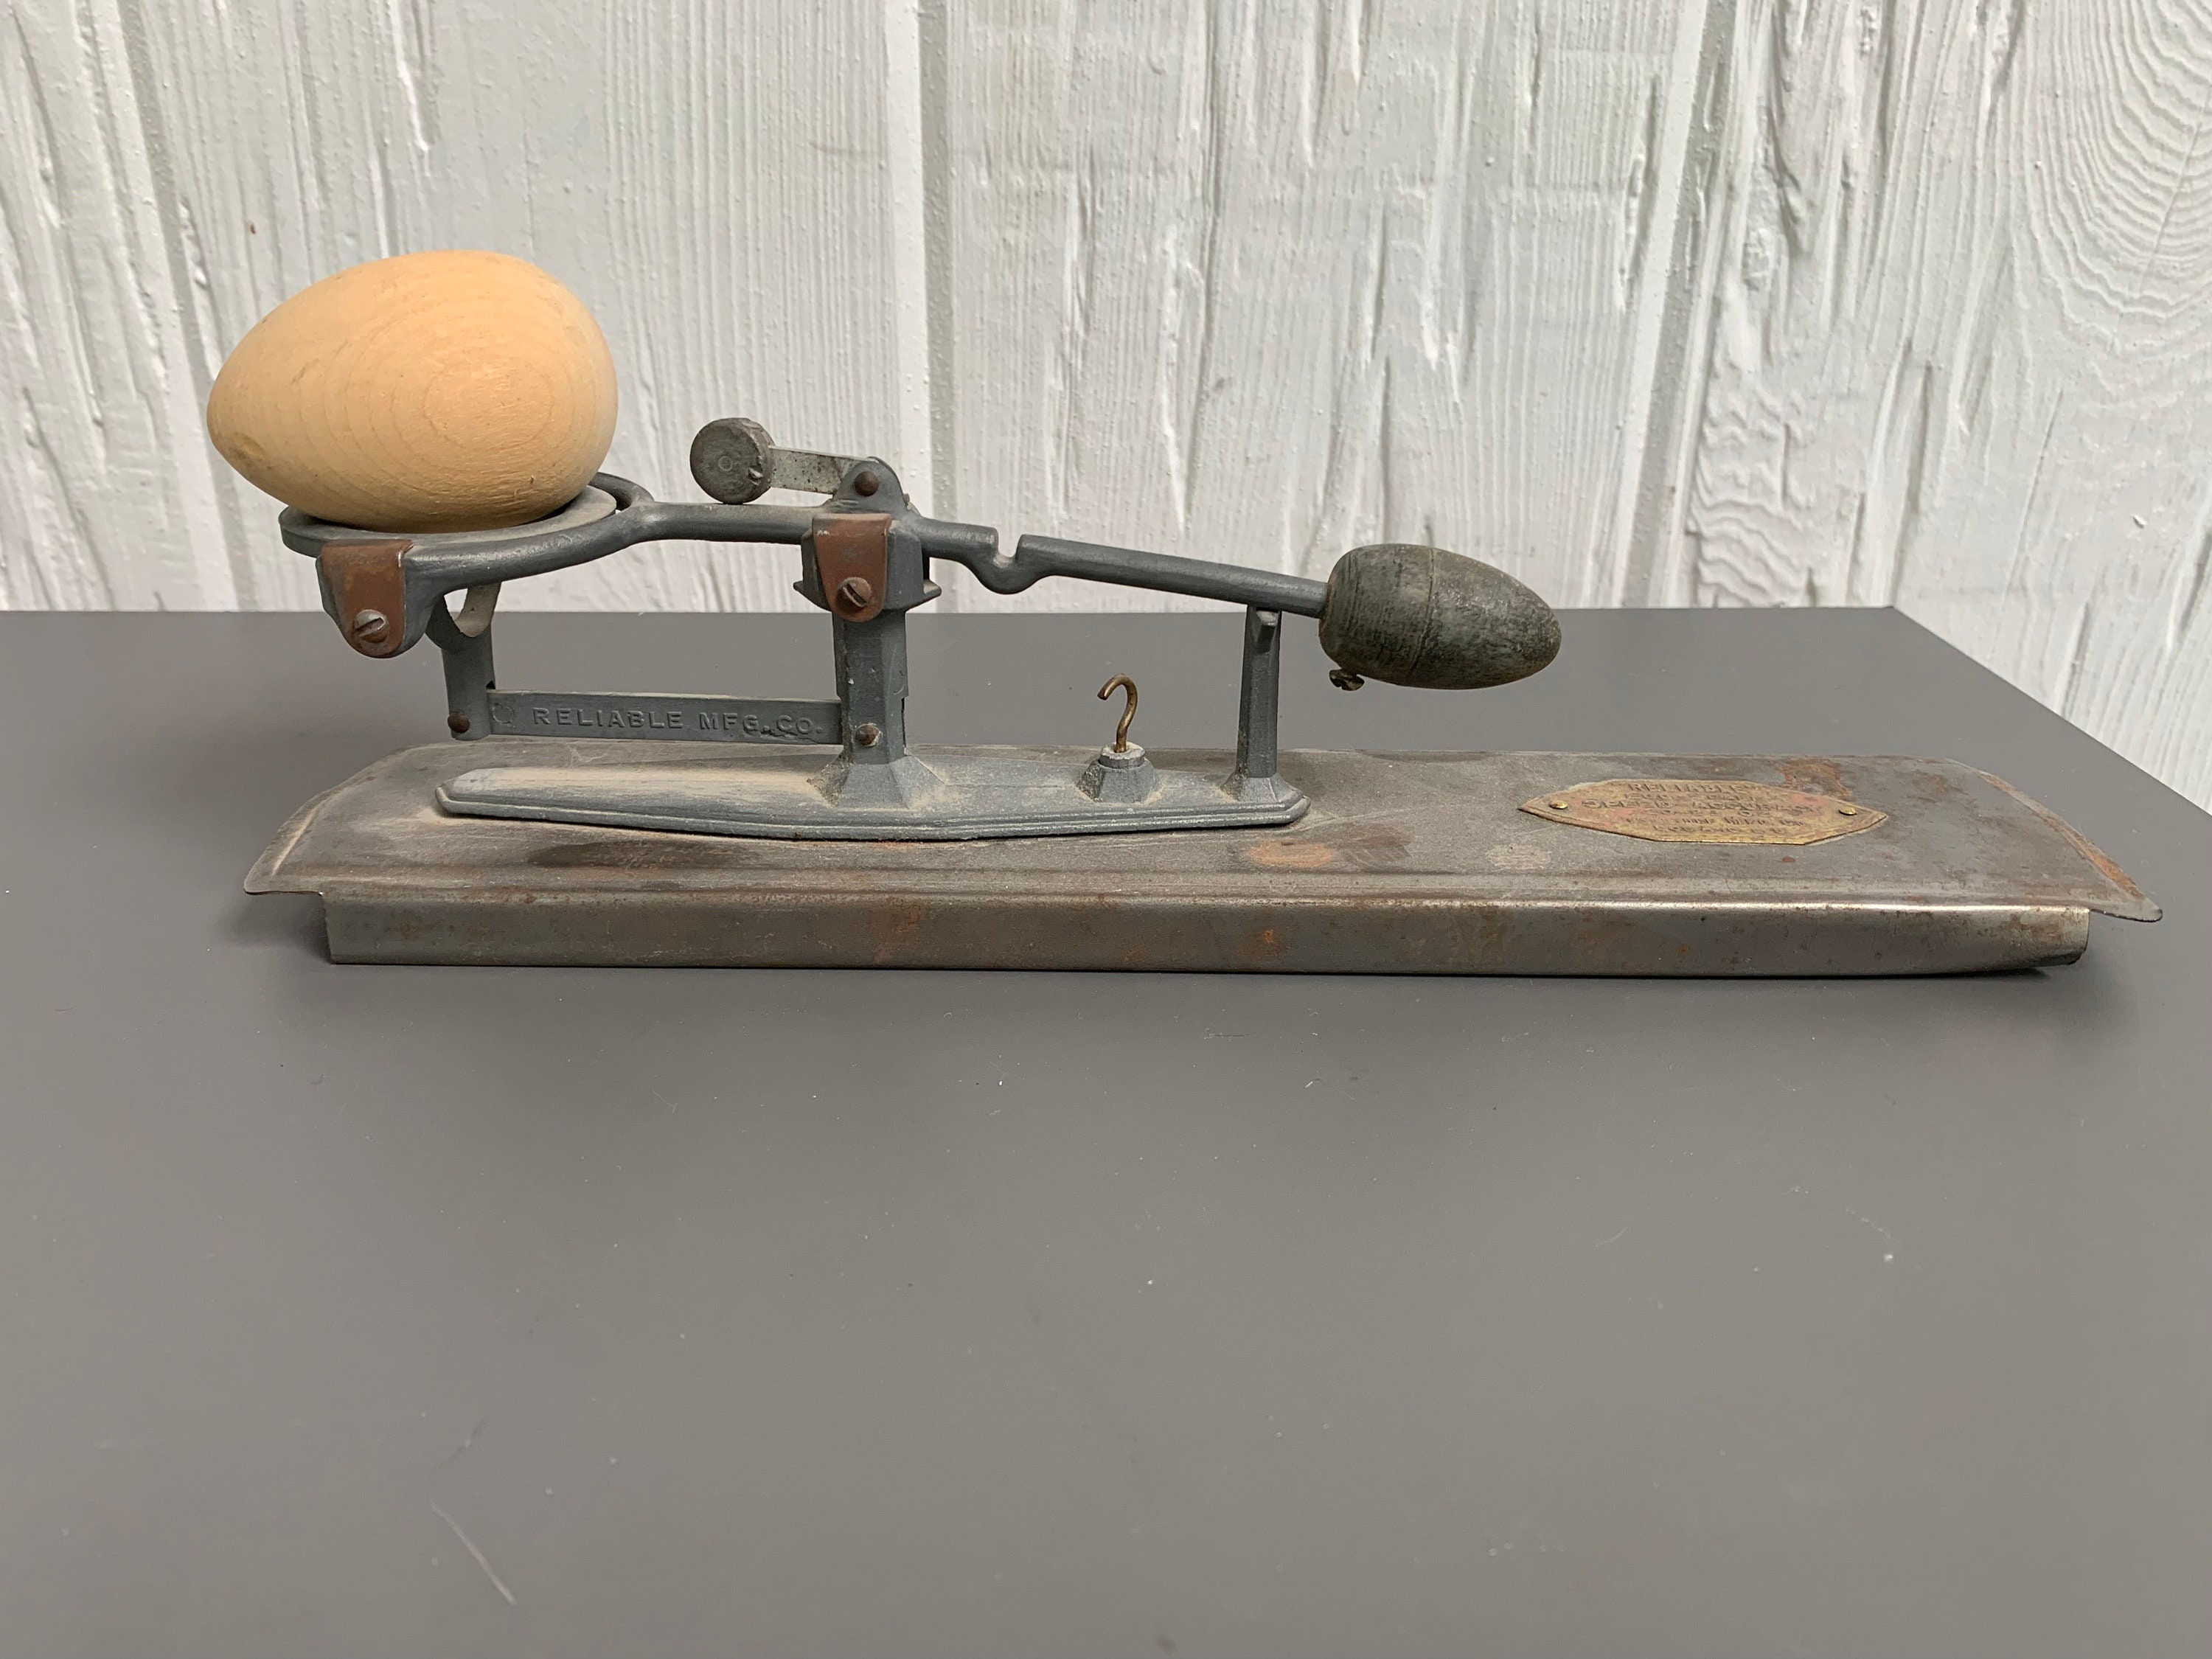 Vintage Style Jiffy Way Metal Poultry Egg Weighing Scale Rustic Farmhouse  Decor